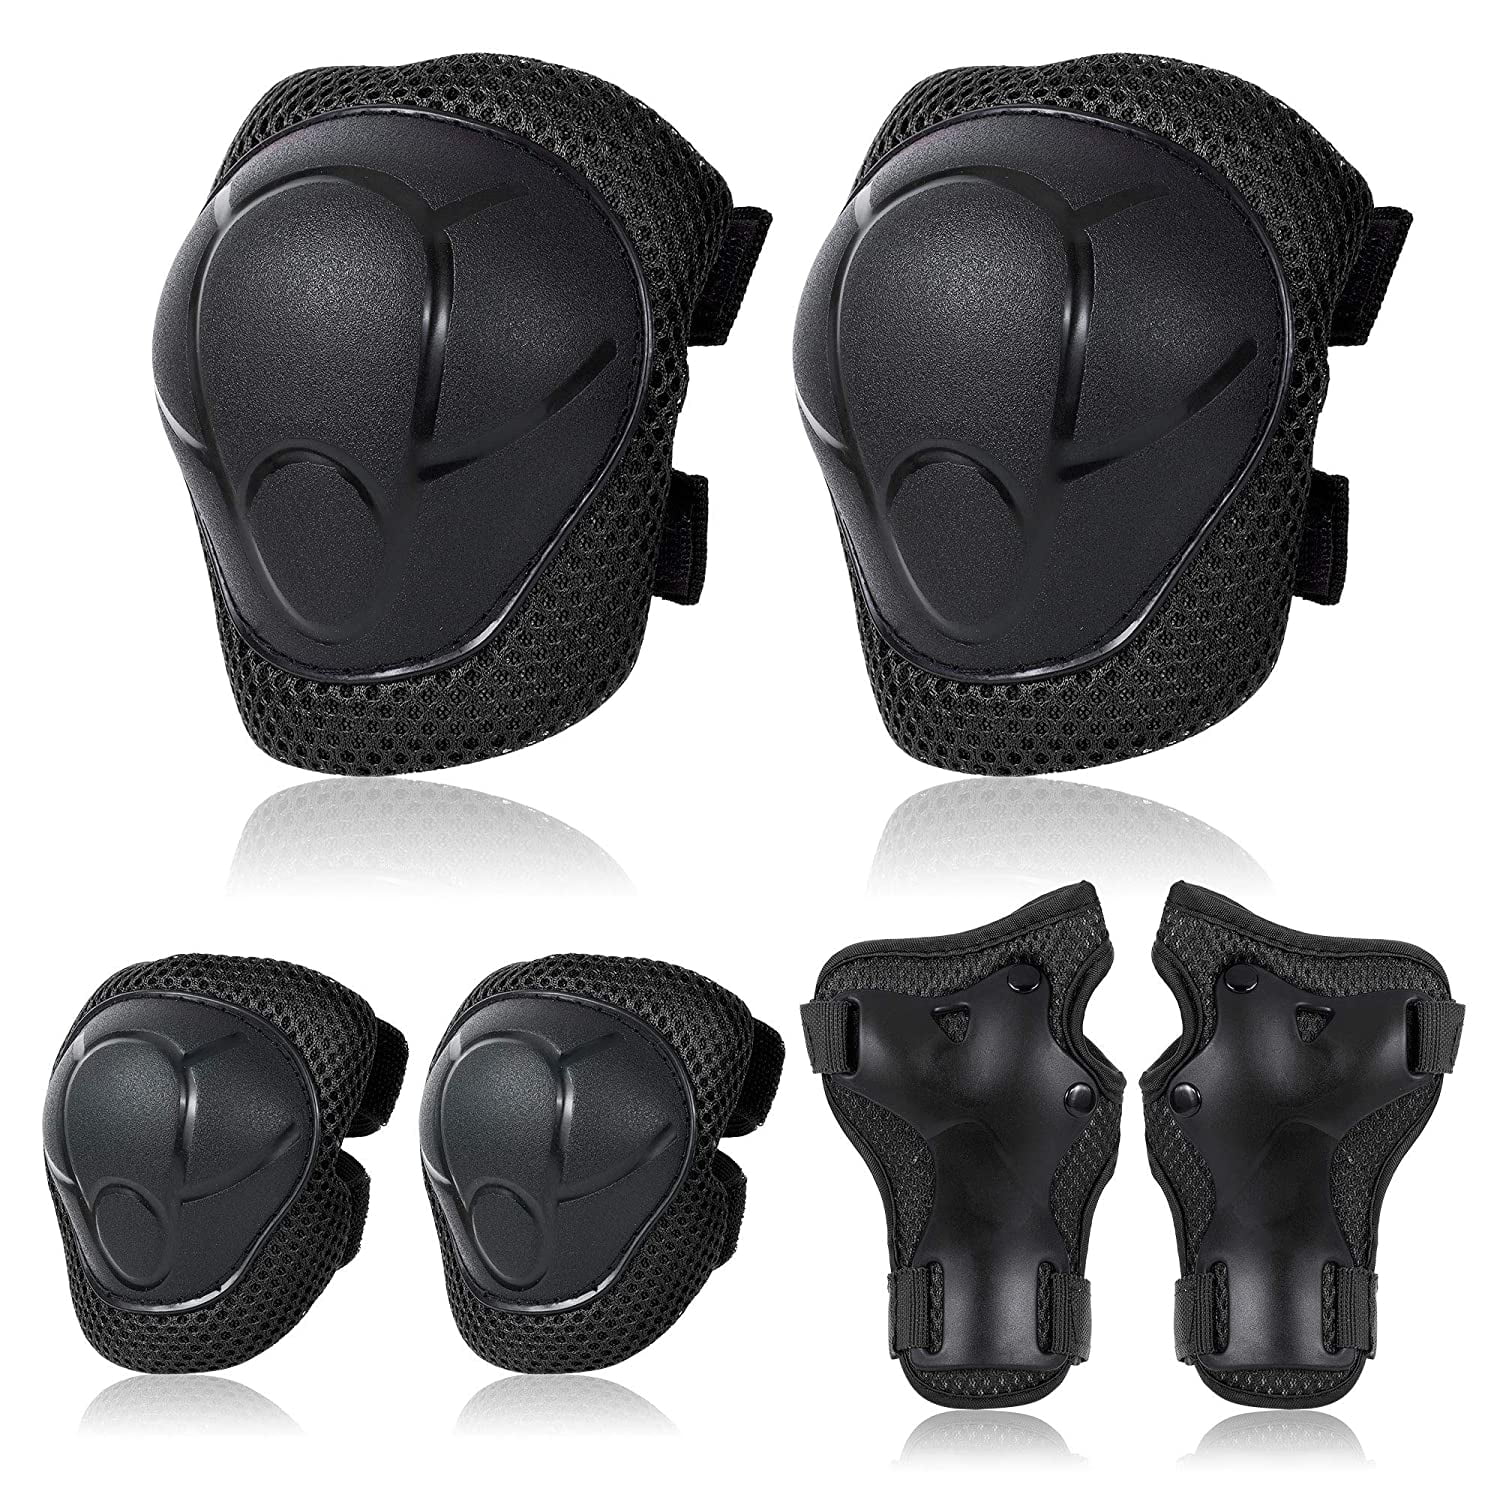 6/7PCS Kids Girls Boys Safety Protective Knee/Elbow/Wrist Guard Gear Pad Sets US